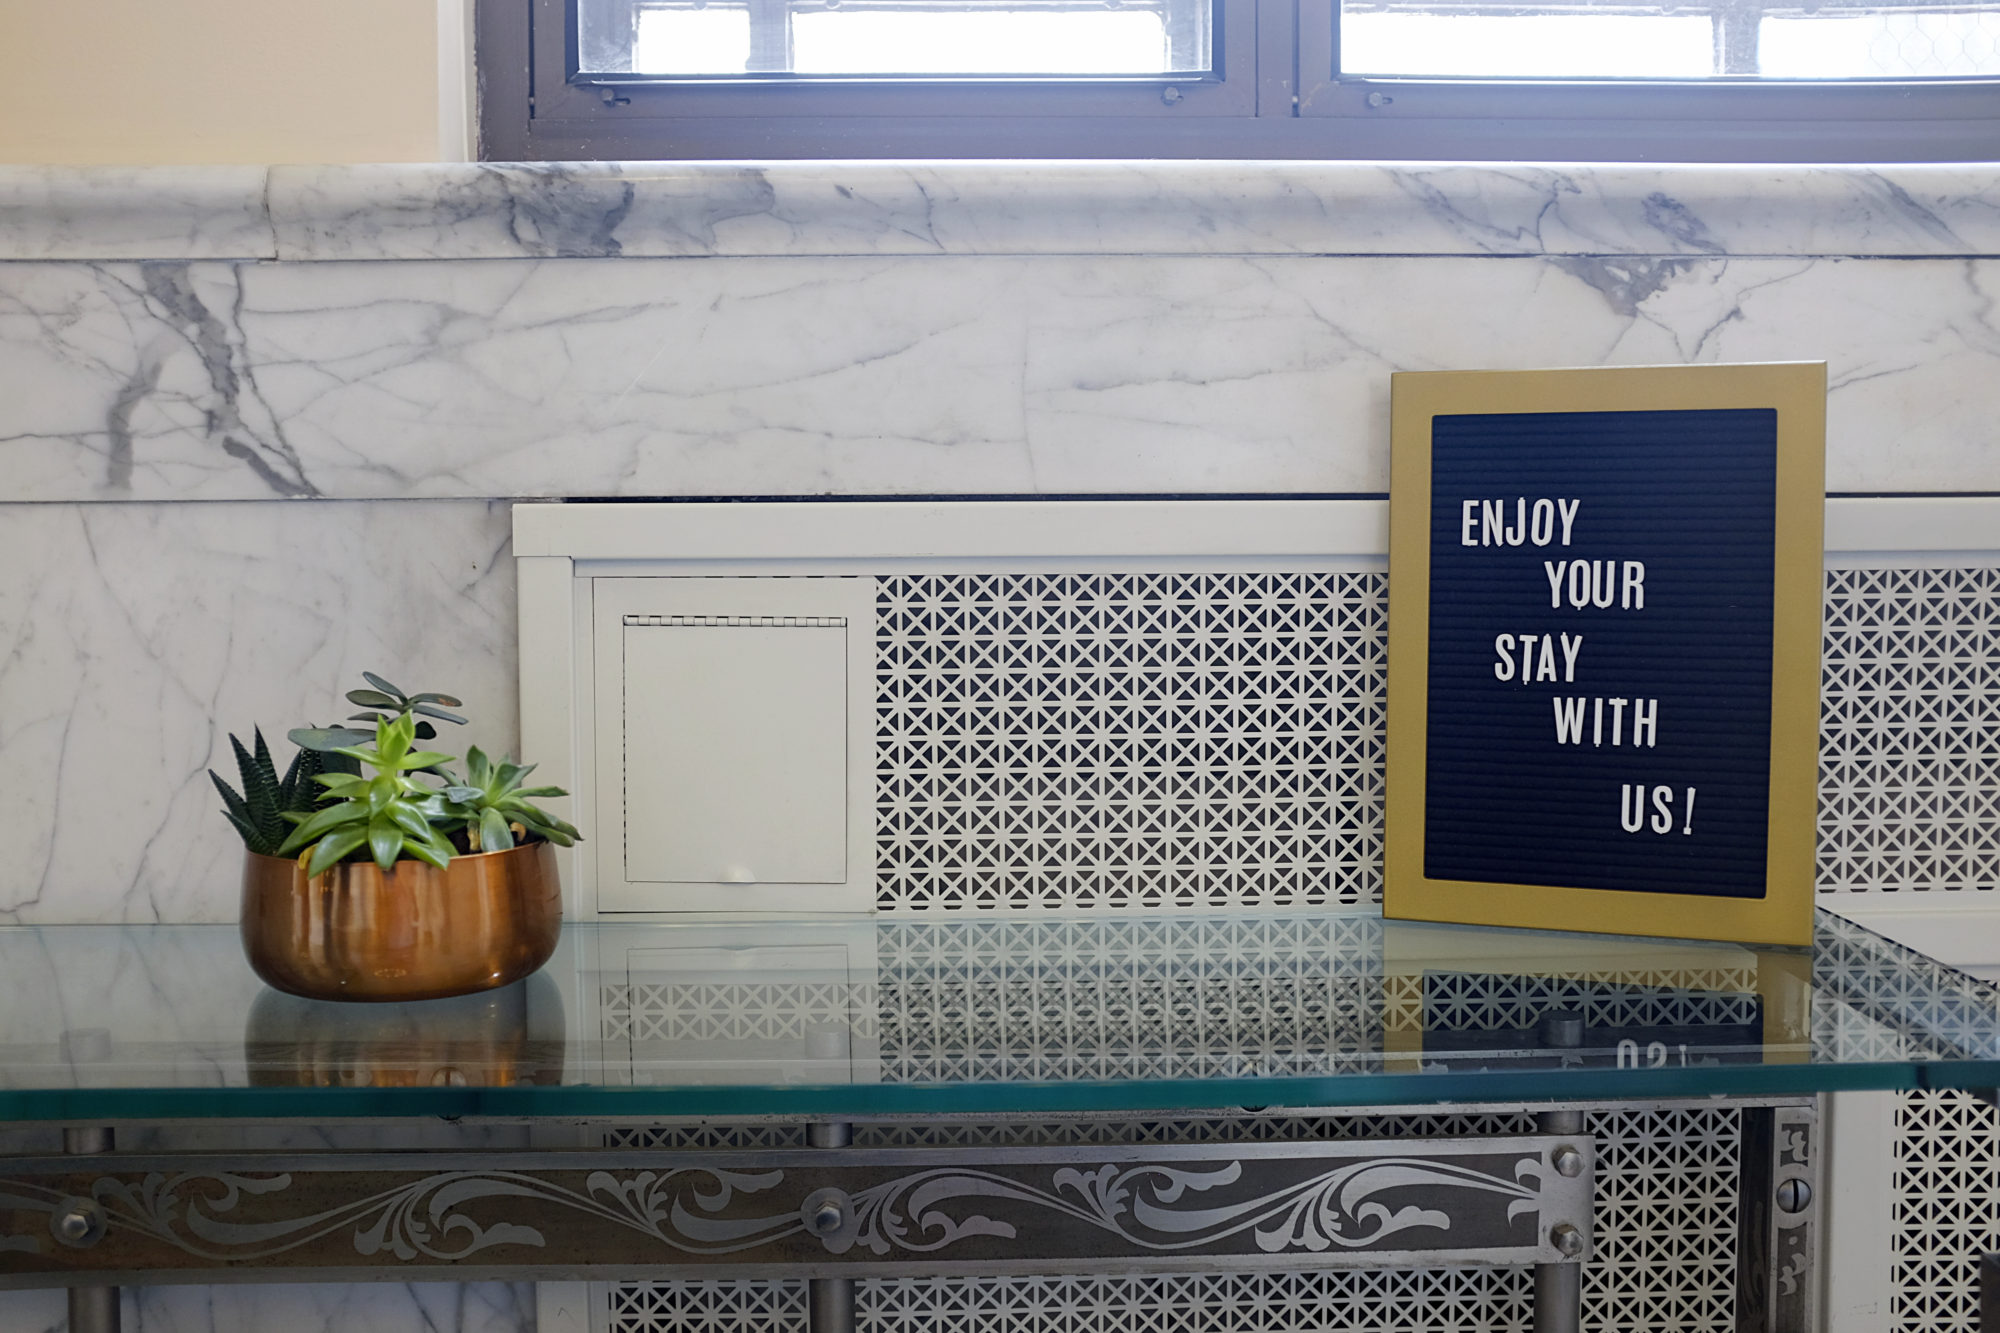 A letterboard reads "Enjoy your stay with us"